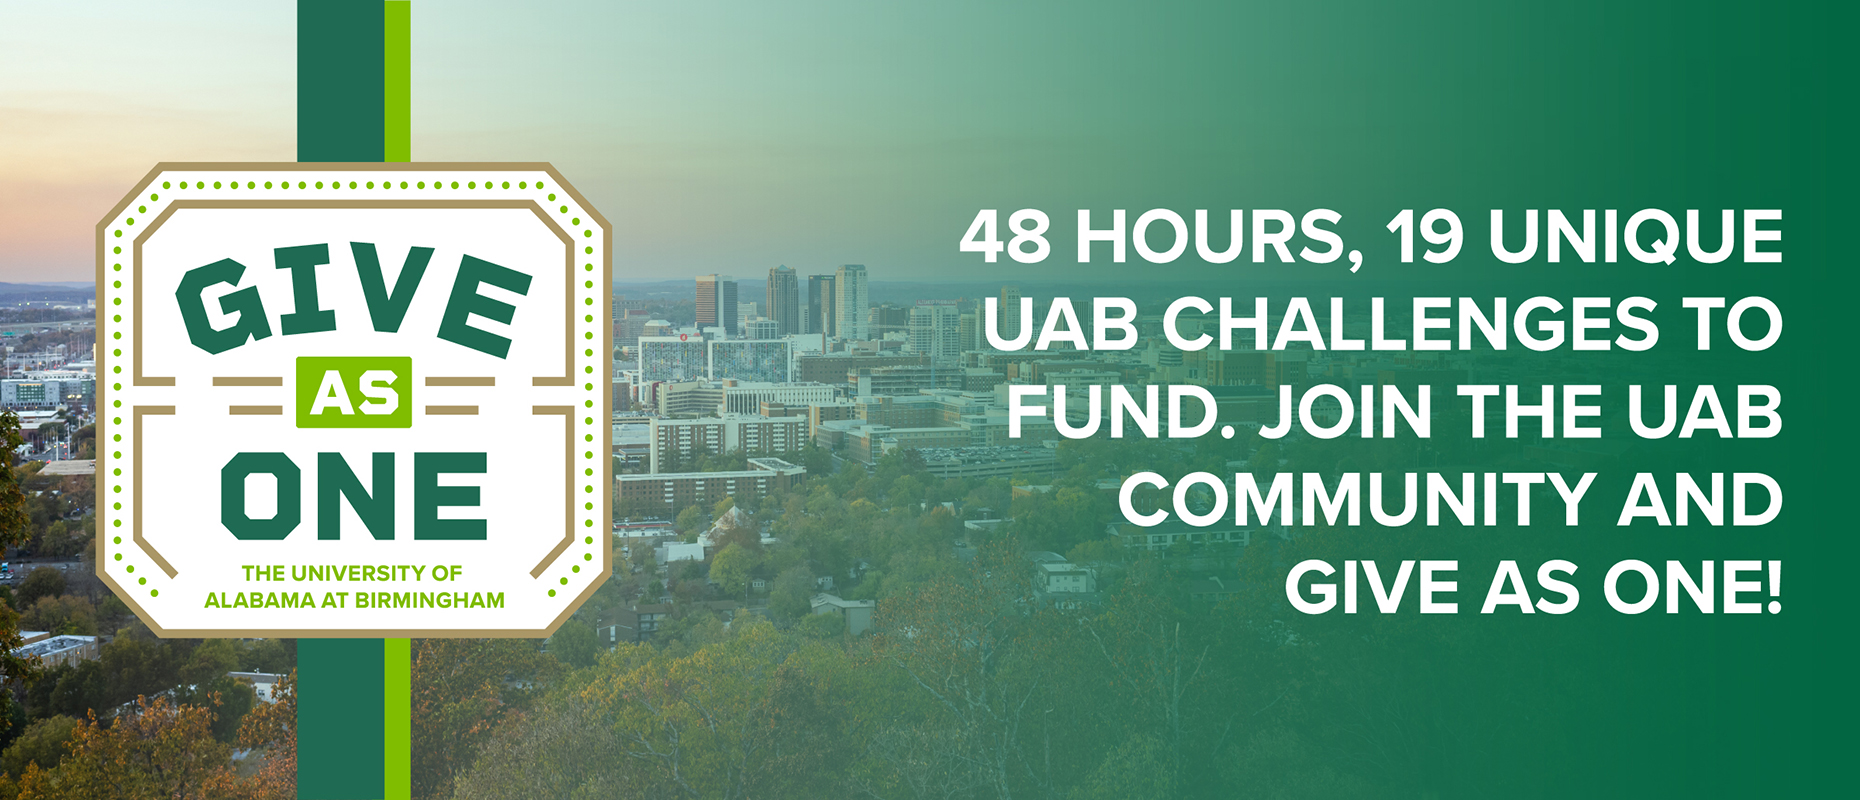 Give As One: 48 hours, 19 unique UAB challenges to fund. Join the UAB community and Give as One!